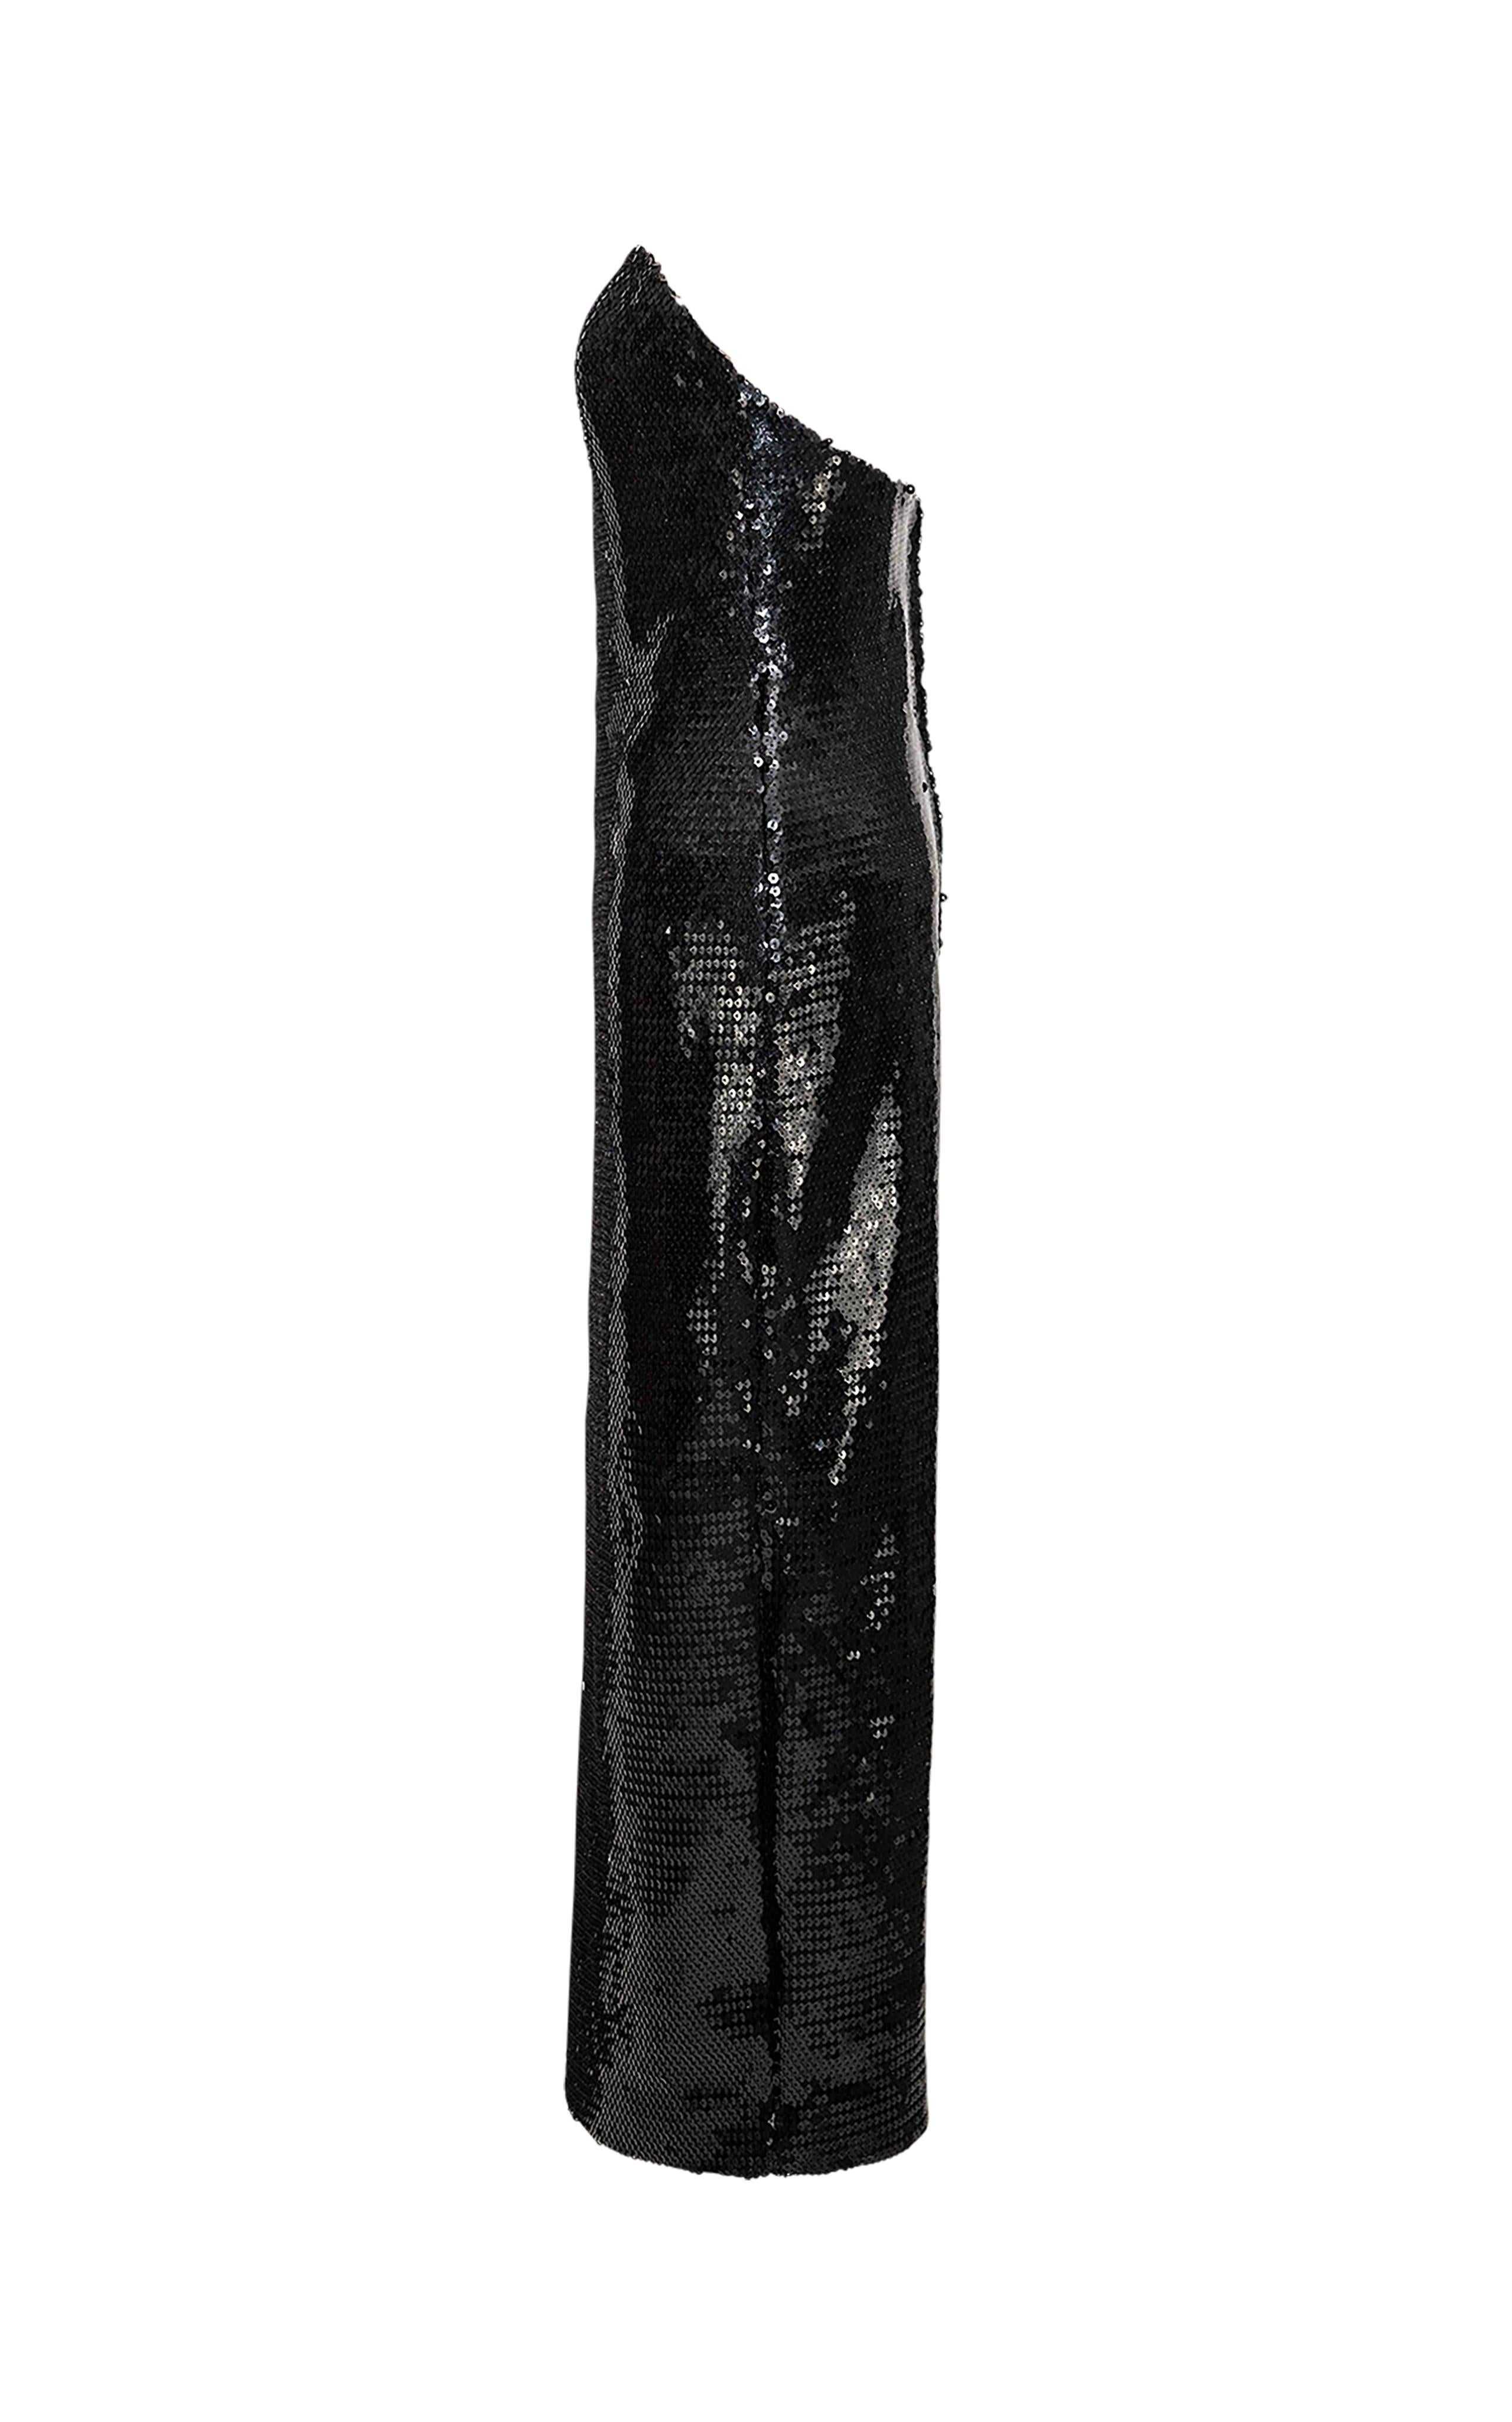 1980’s Stephen Sprouse strapless black sequin gown. Mid-sized slit in rear. Thin lining and structured bodice. Fabric has moderate stretch throughout. Due to stretch, hip fits up to 20